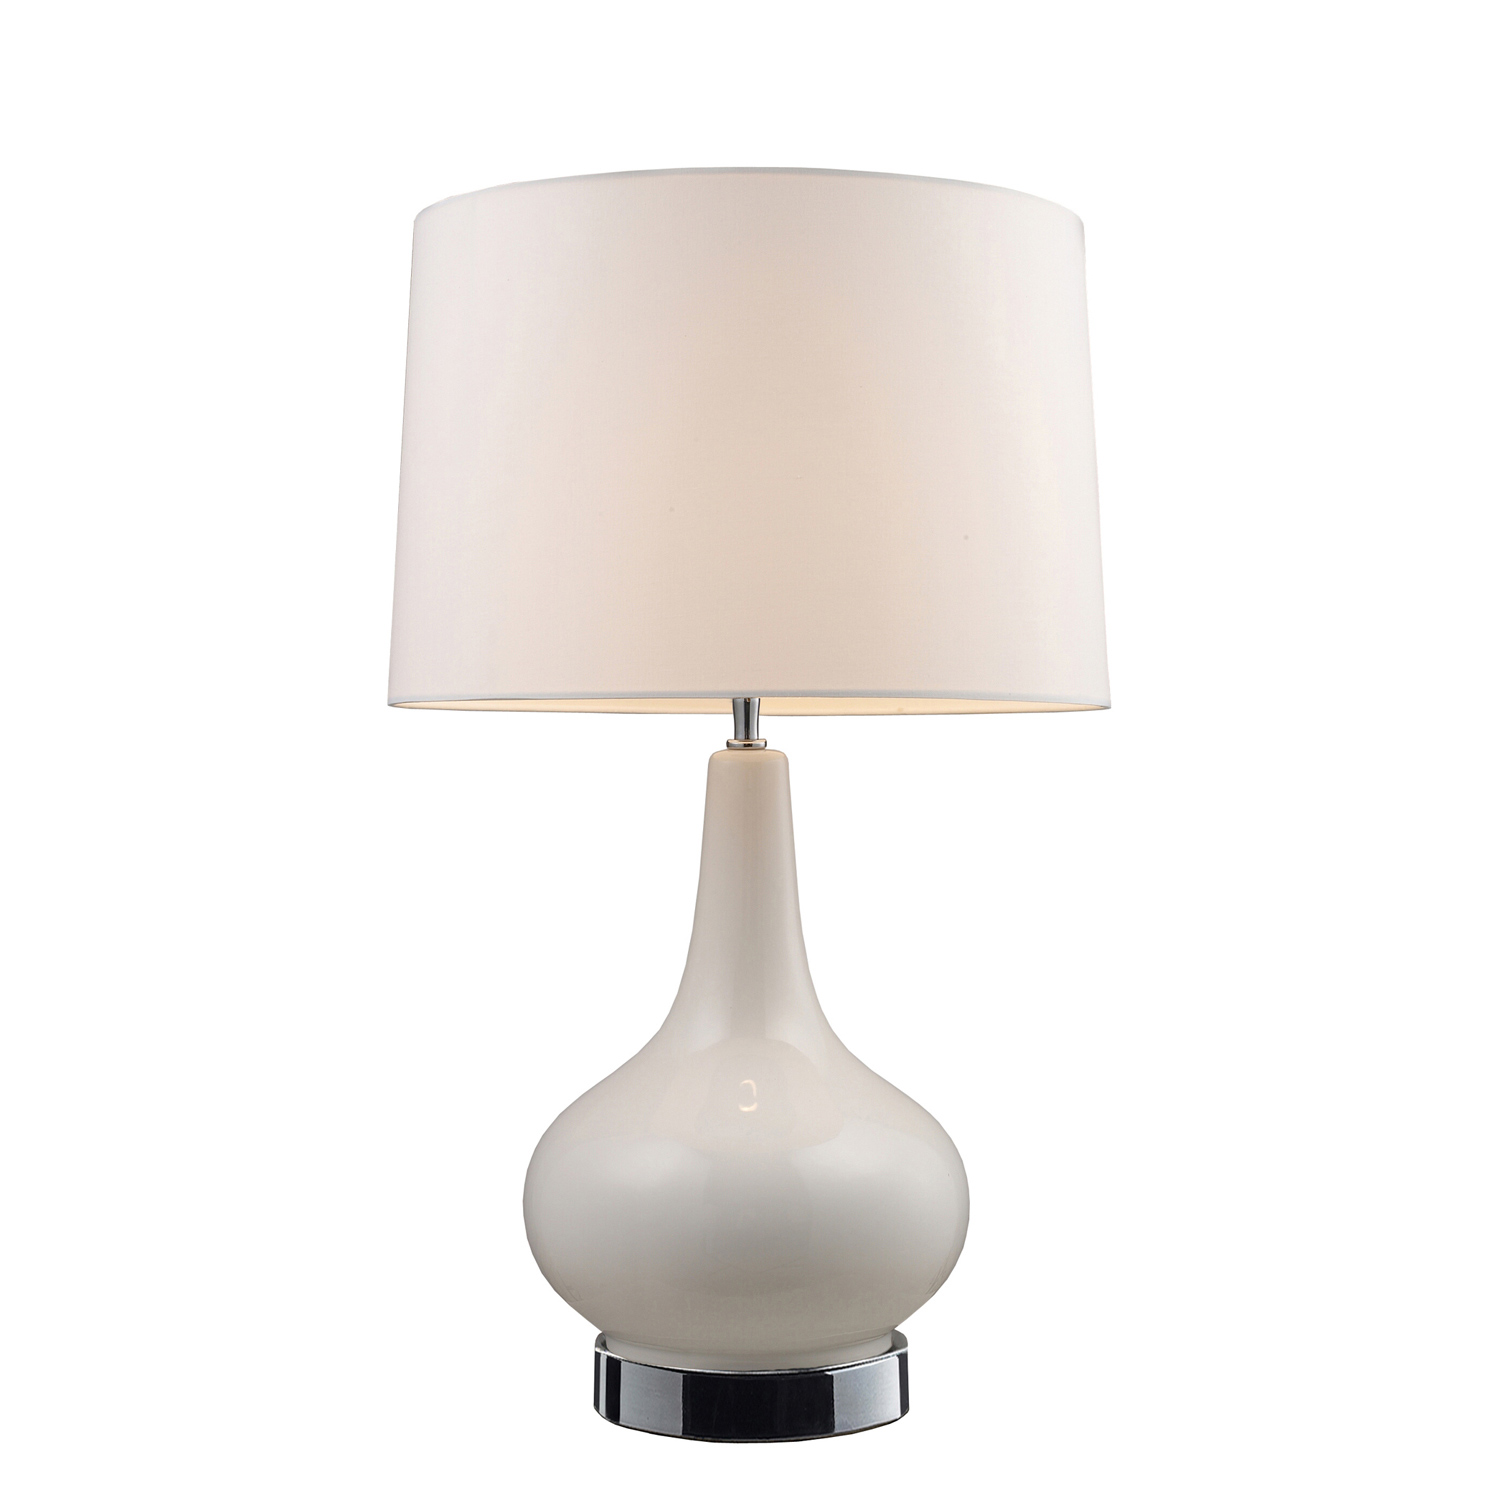 Elk Lighting 3935/1 Continuum Table Lamp - White and Chrome